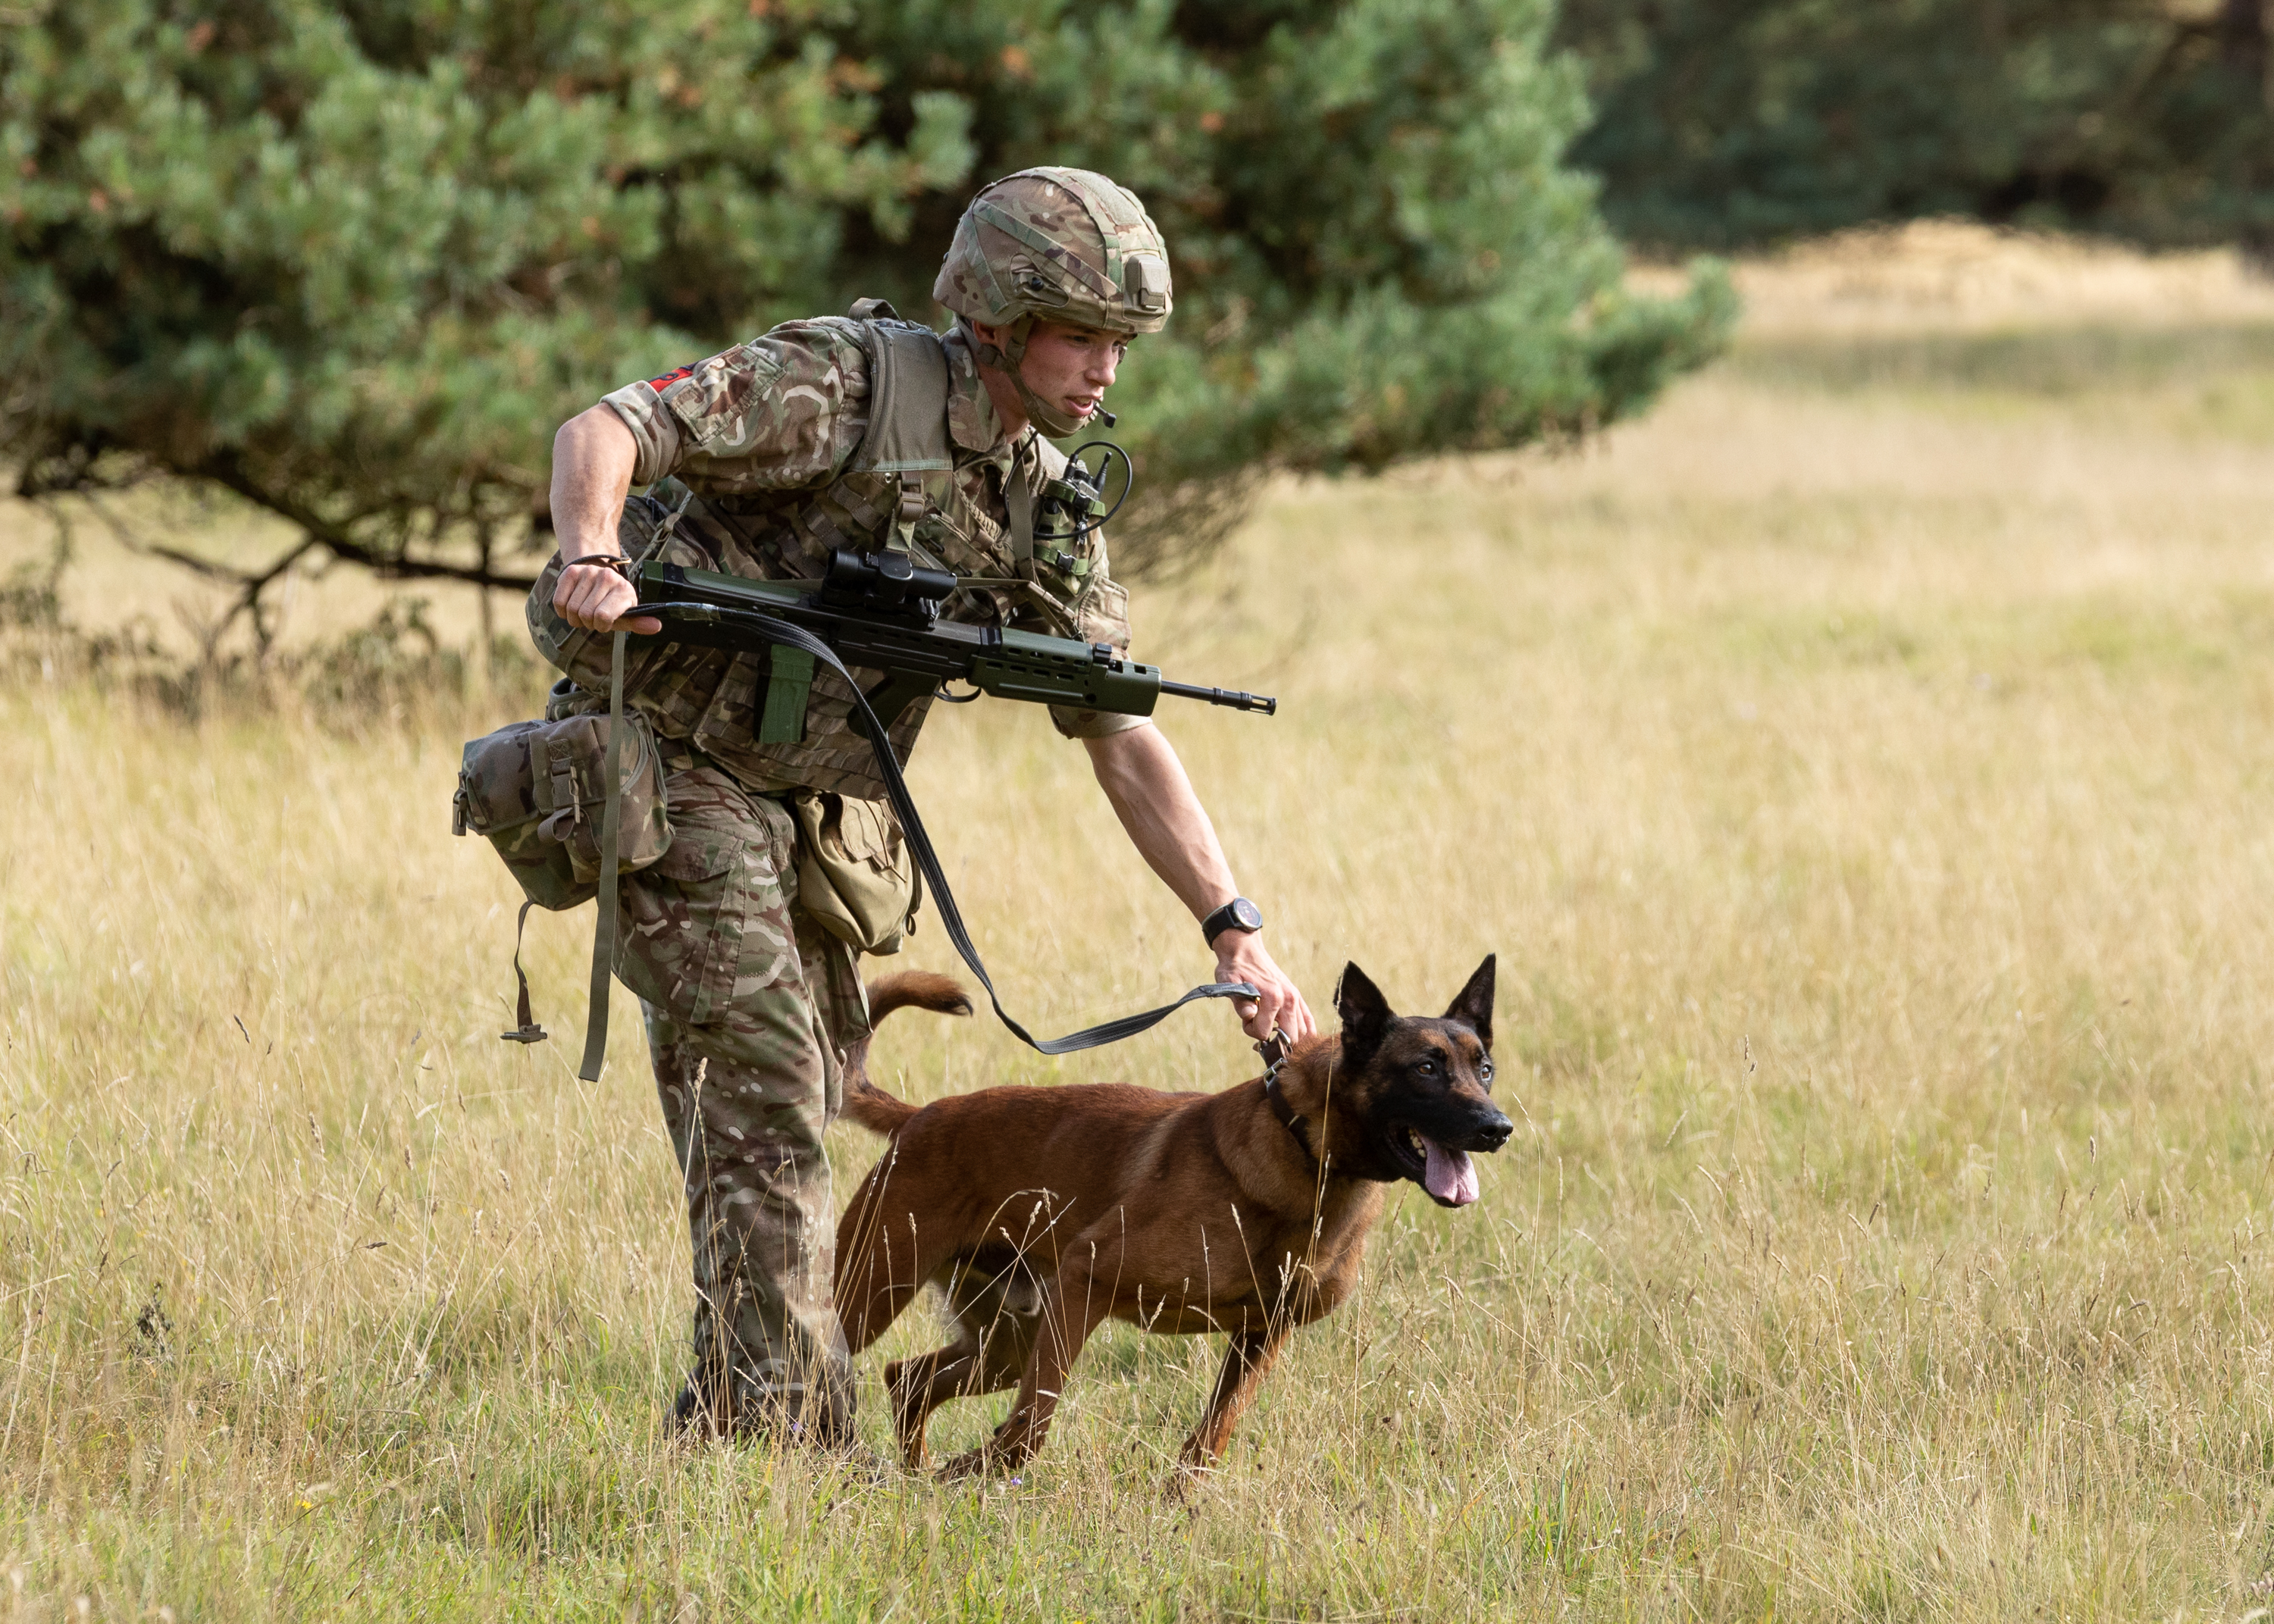 Image shows RAF dog handler with Military Working Dog in a field.